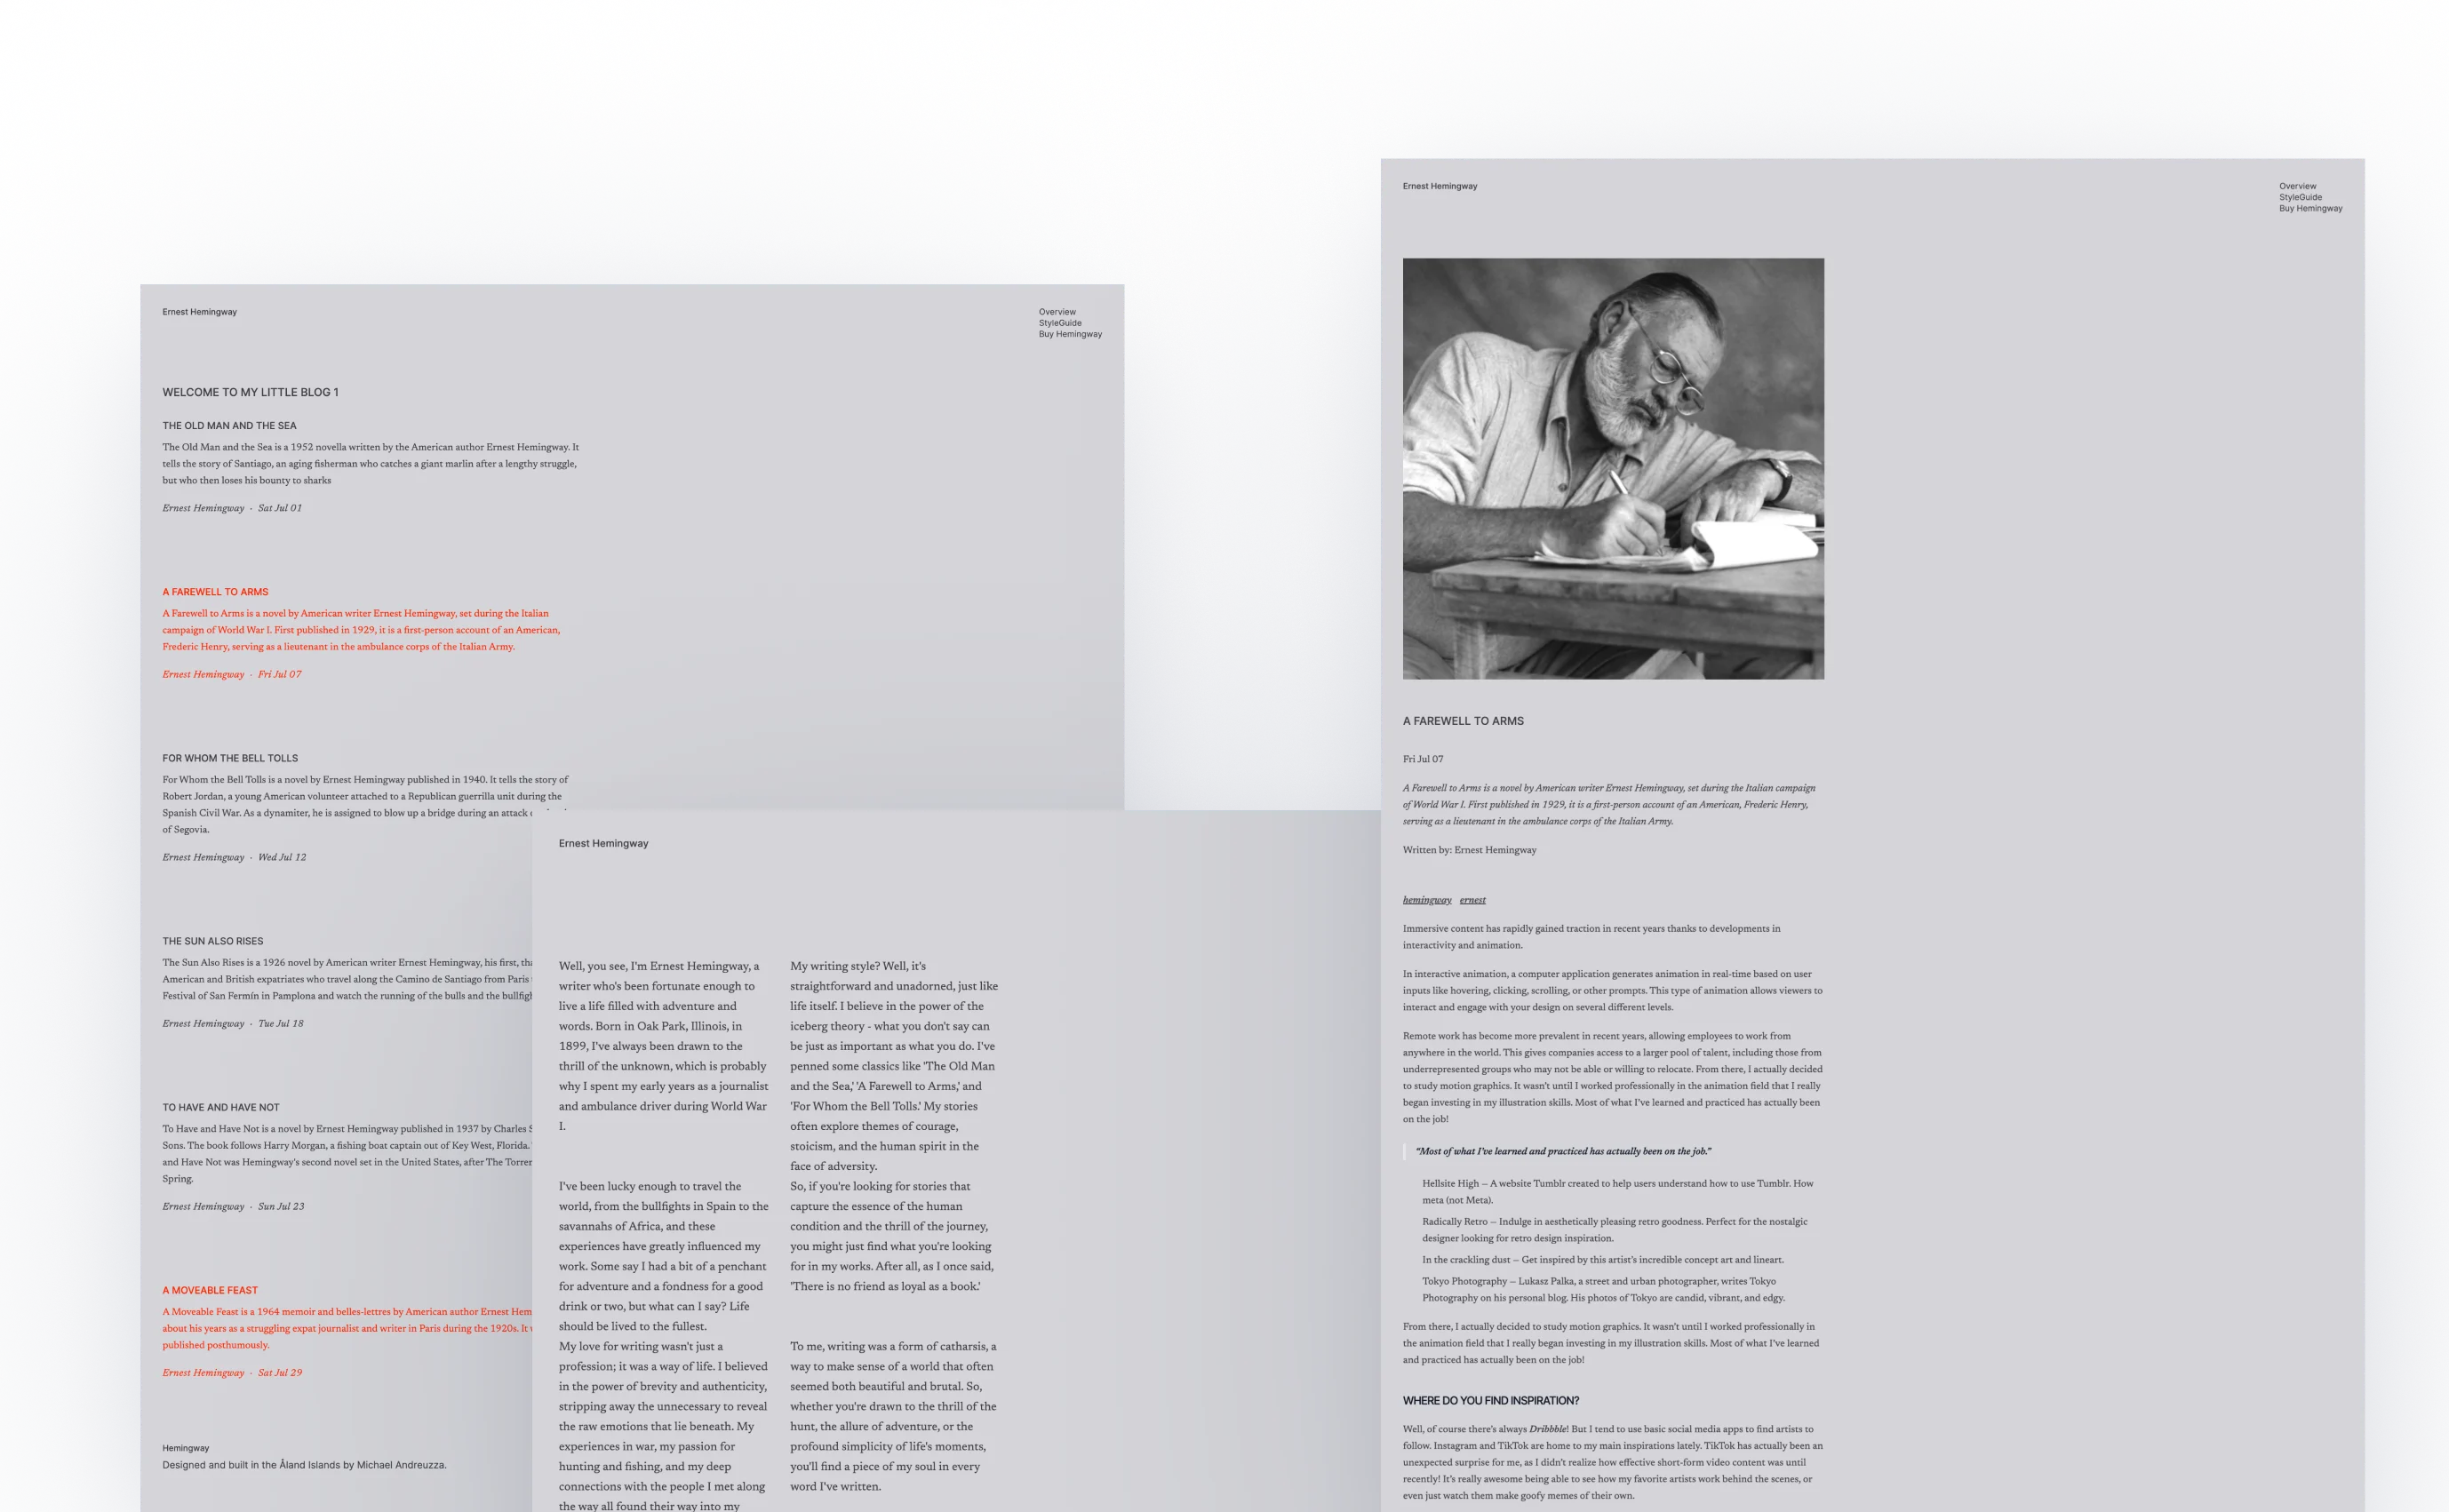 A literary blog theme featuring works by Ernest Hemingway, with a clean, minimalist design. The main page lists classic titles like 'The Old Man and the Sea' and 'A Farewell to Arms,' each with a brief synopsis. On the sidebar, an image of Hemingway writing is accompanied by excerpts from his books and a personal quote about his writing style.